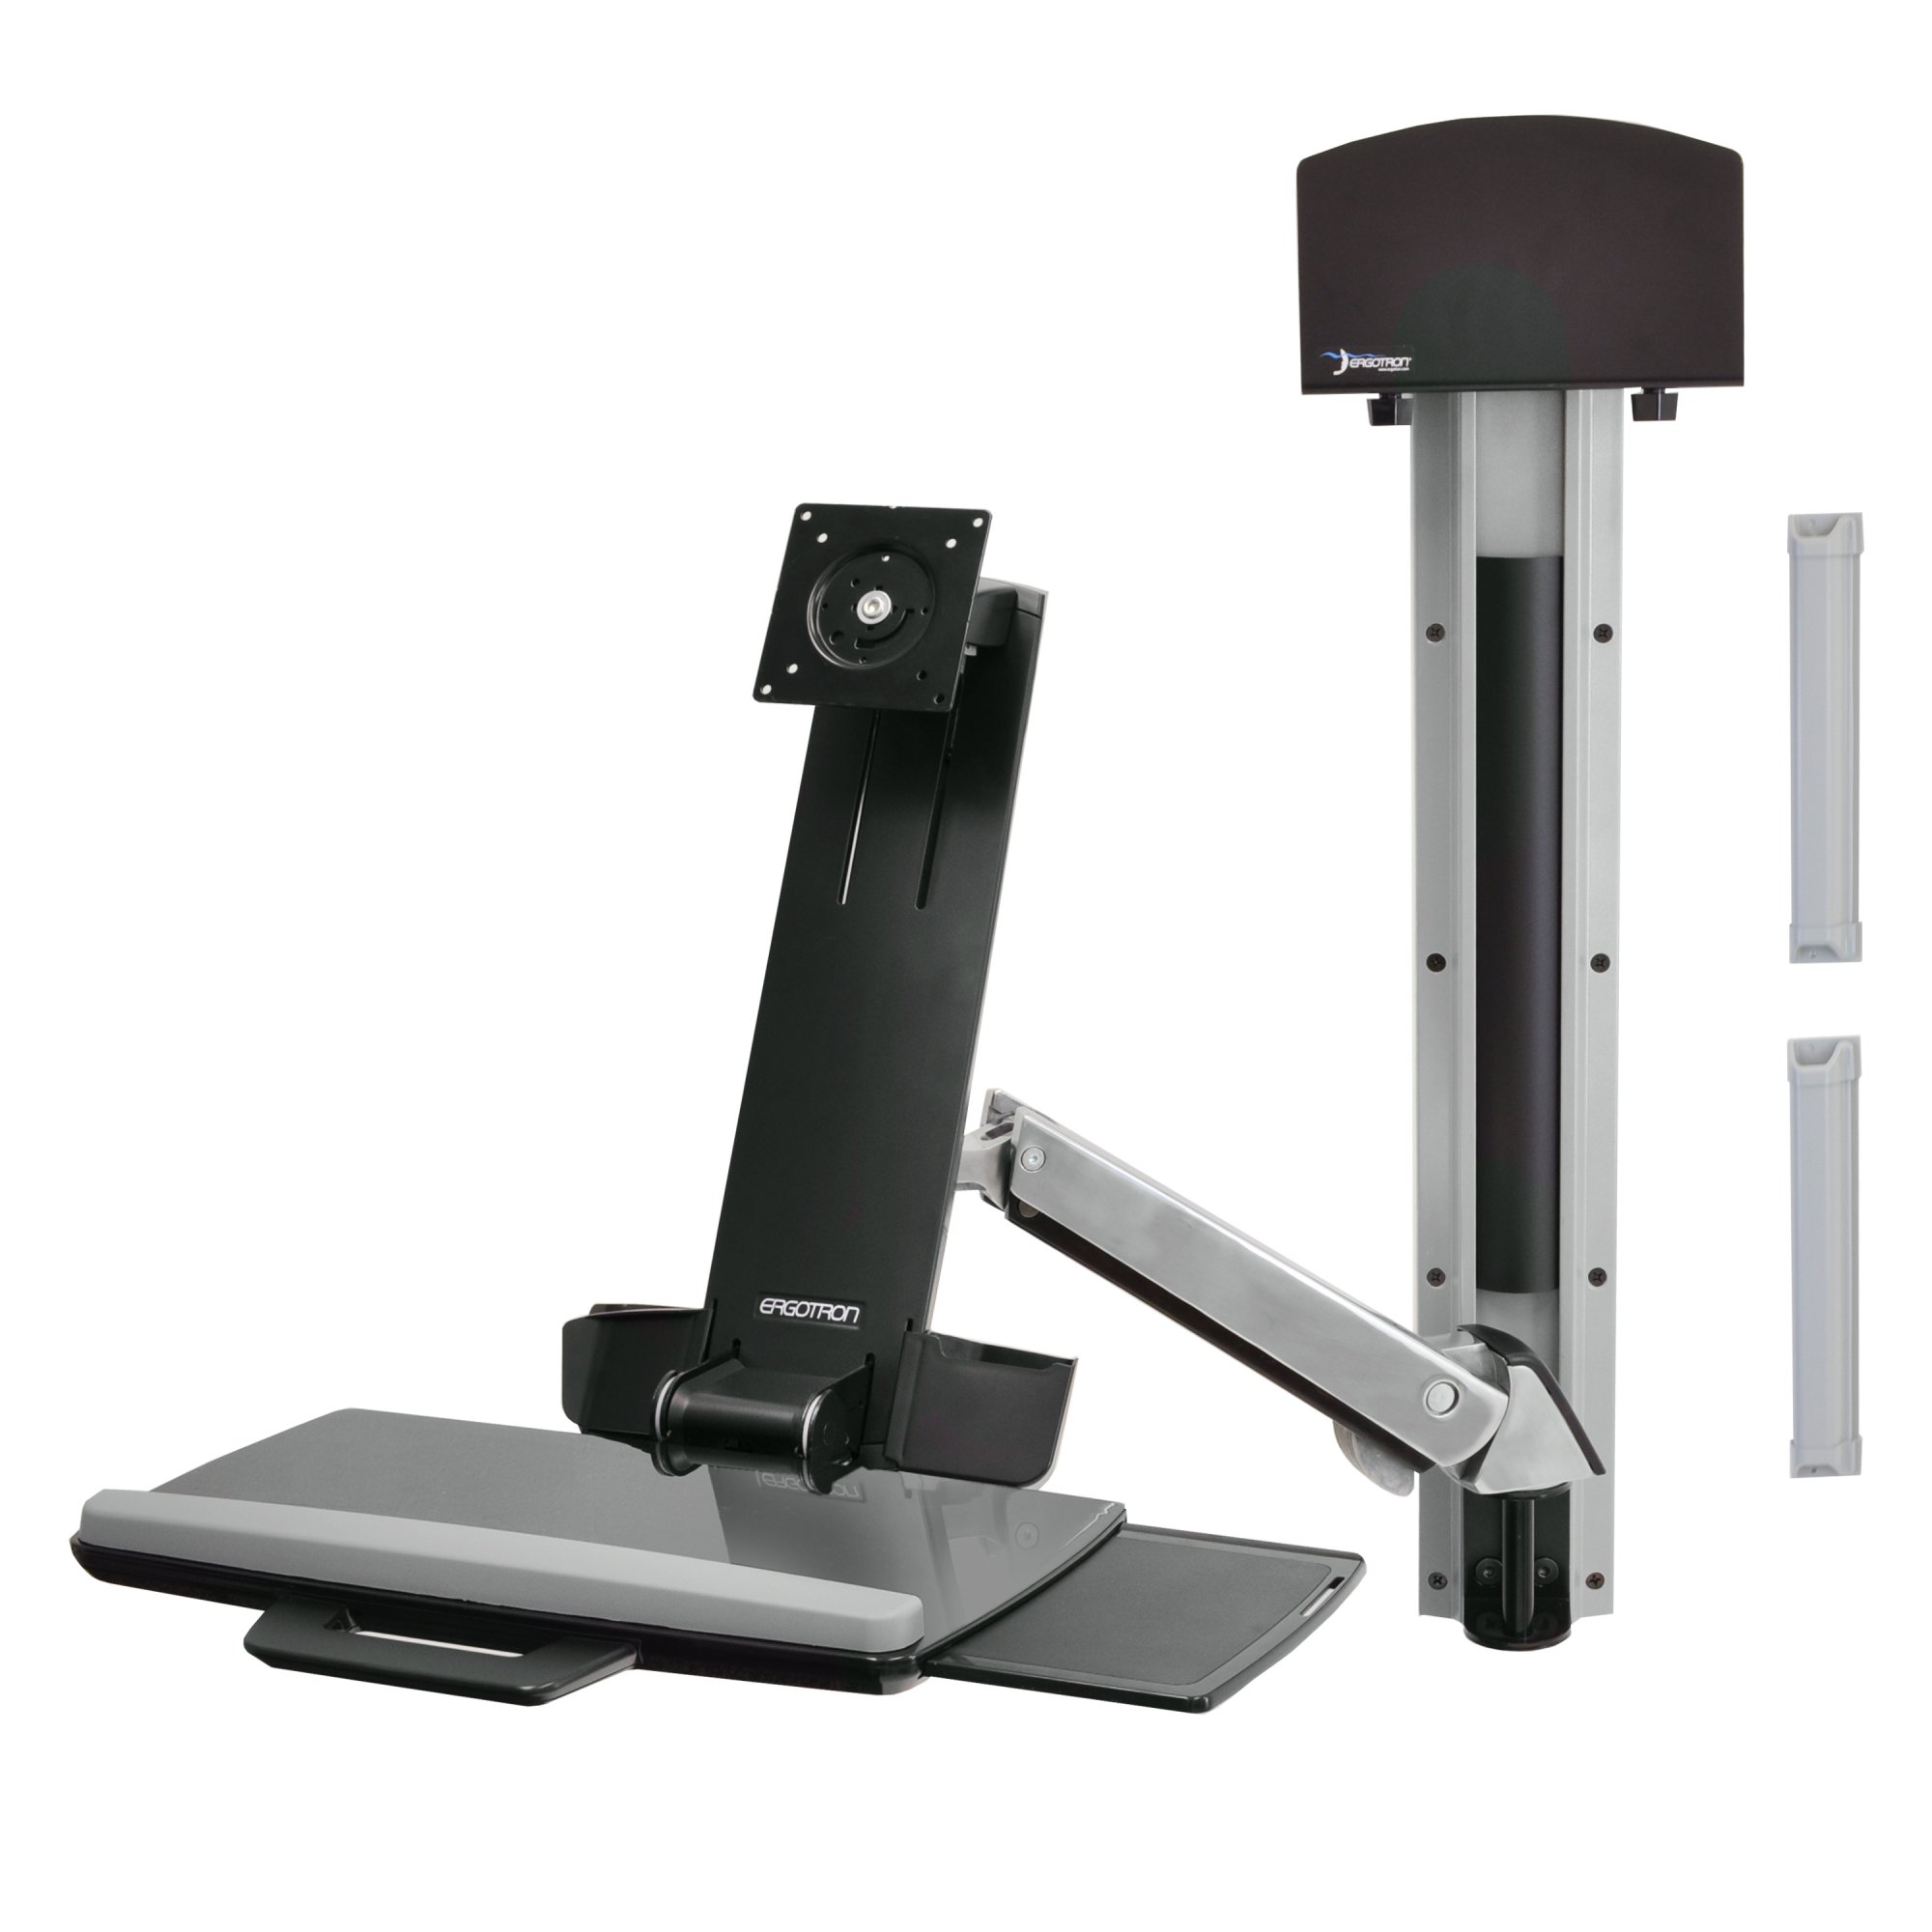 Ergotron 45-273-026 StyleView Sit-Stand Combo System